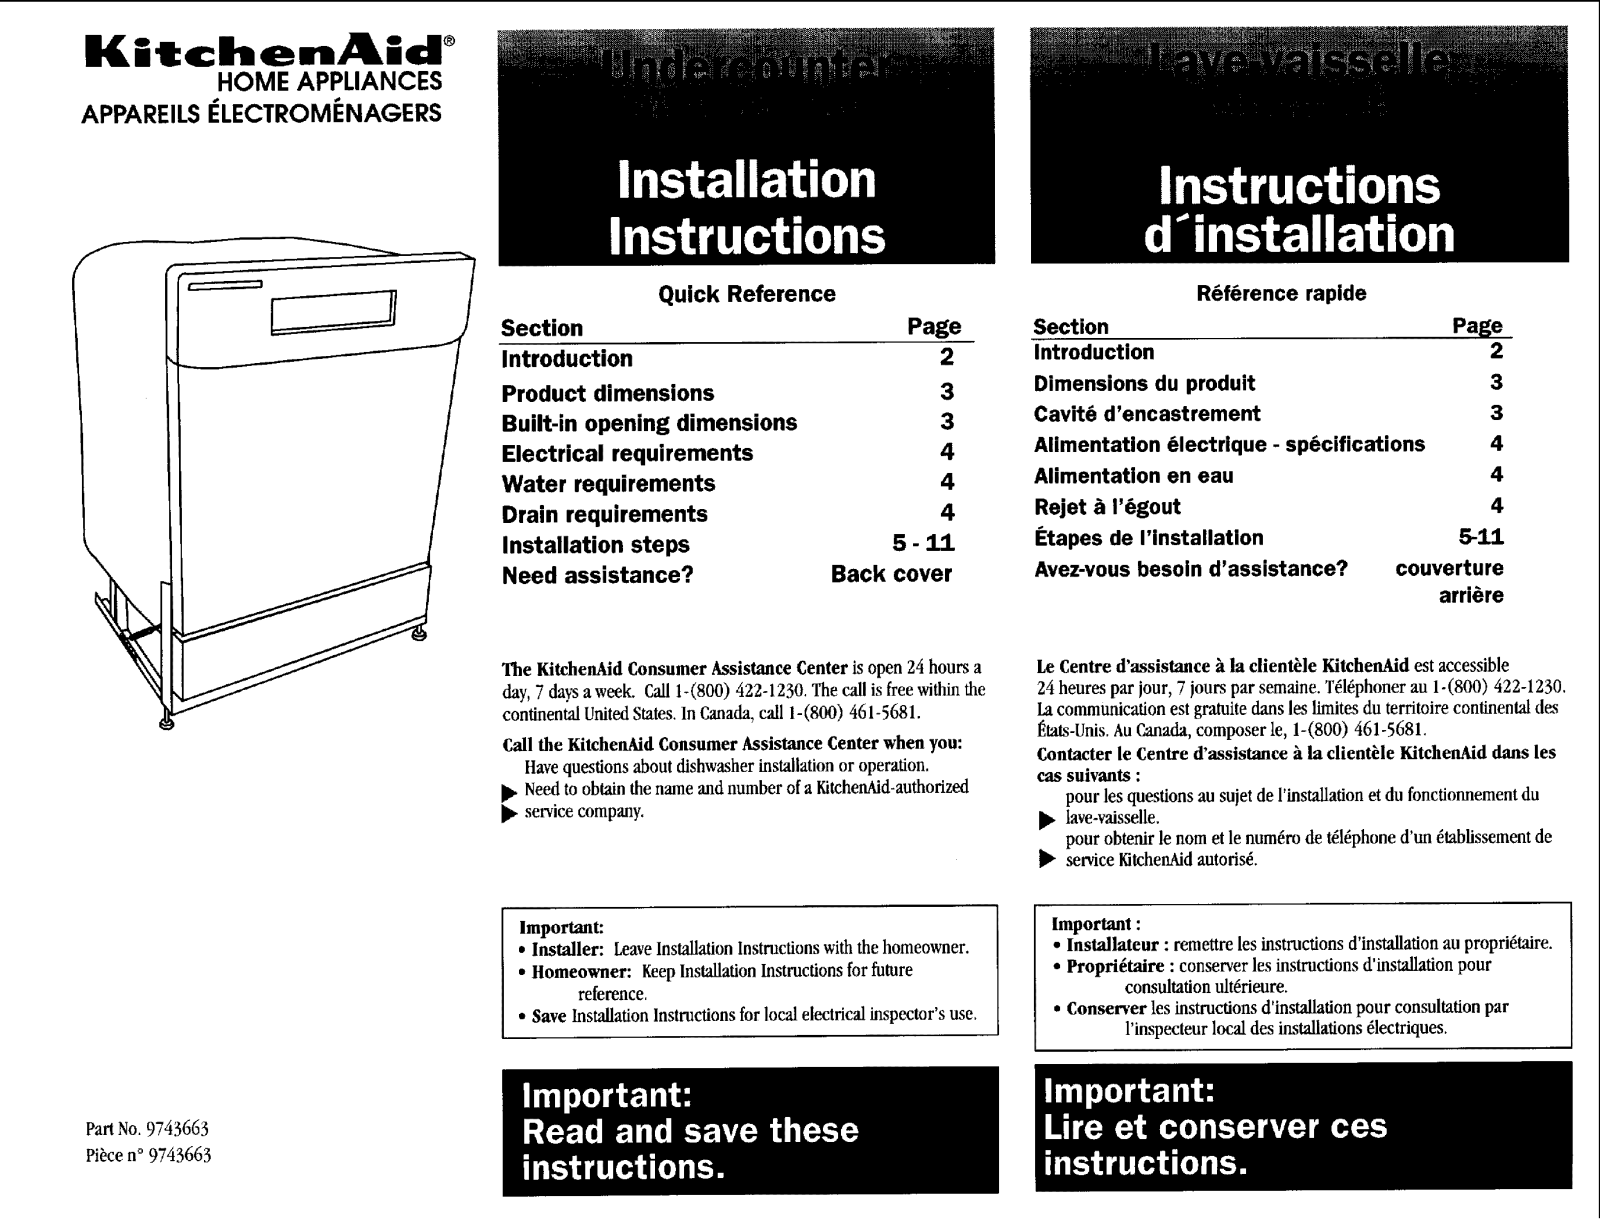 KitchenAid KUDS24SEWH3, KUDS24SEWH4, KUDS24SEBL3, KUDS24SEBL4, KUDS24SEAL4 Installation Guide